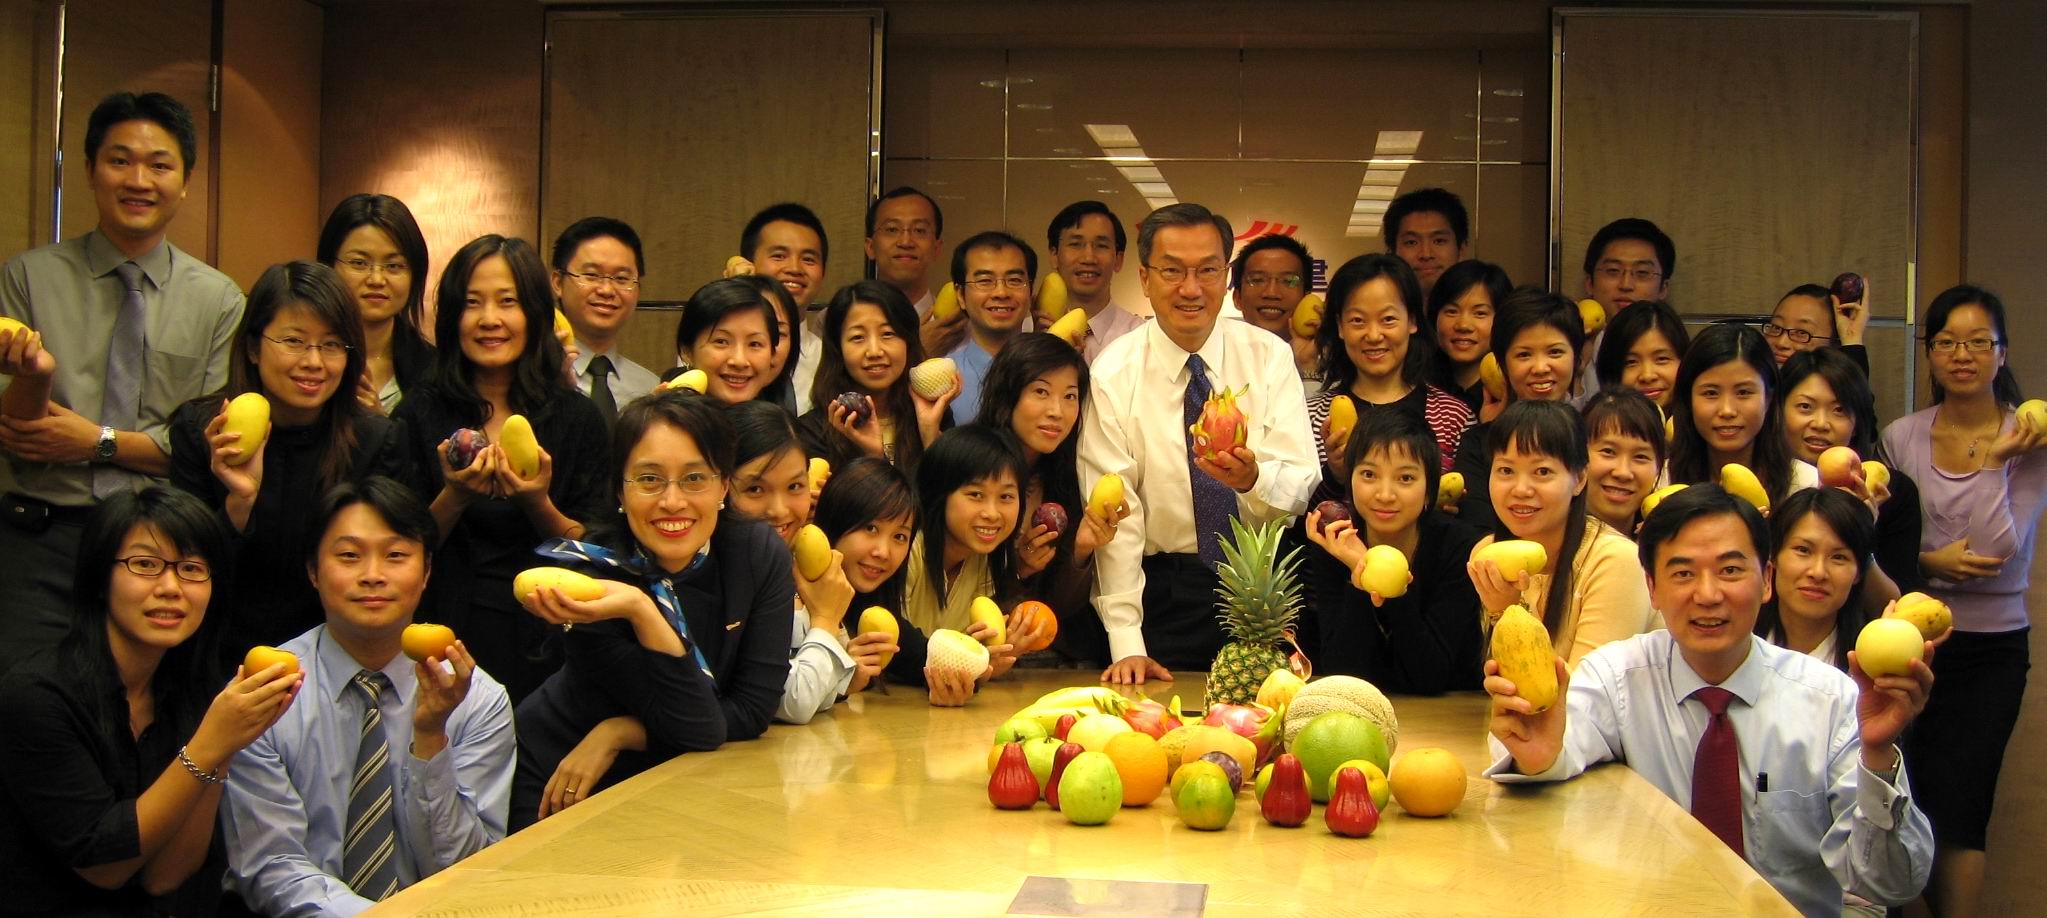 NWS Holdings launches &quot;Fruit for Care&quot; to promote health consciousness